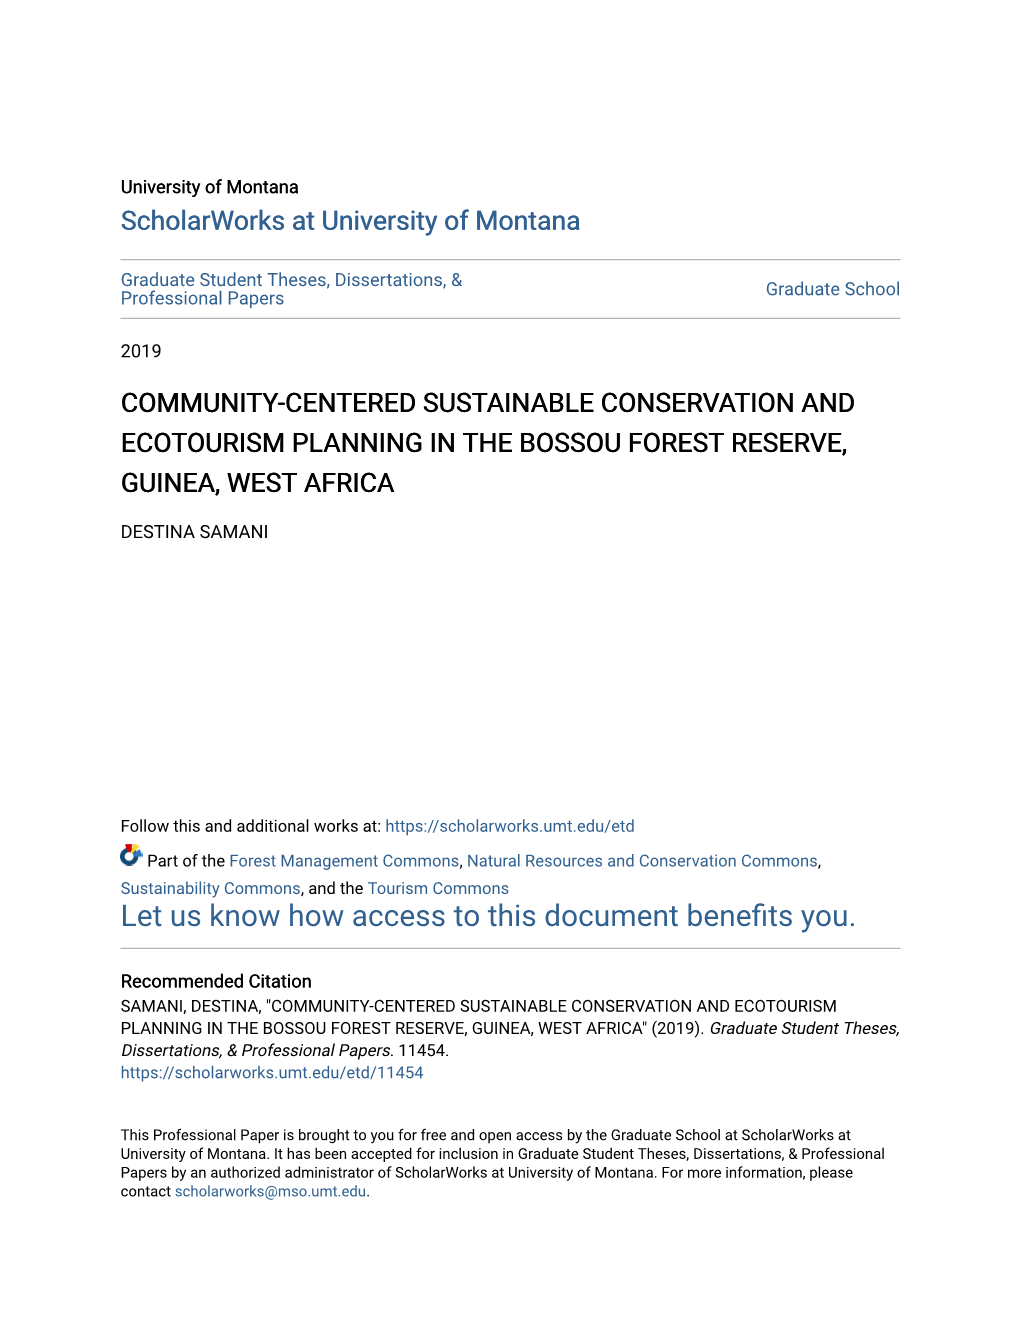 Community-Centered Sustainable Conservation and Ecotourism Planning in the Bossou Forest Reserve, Guinea, West Africa